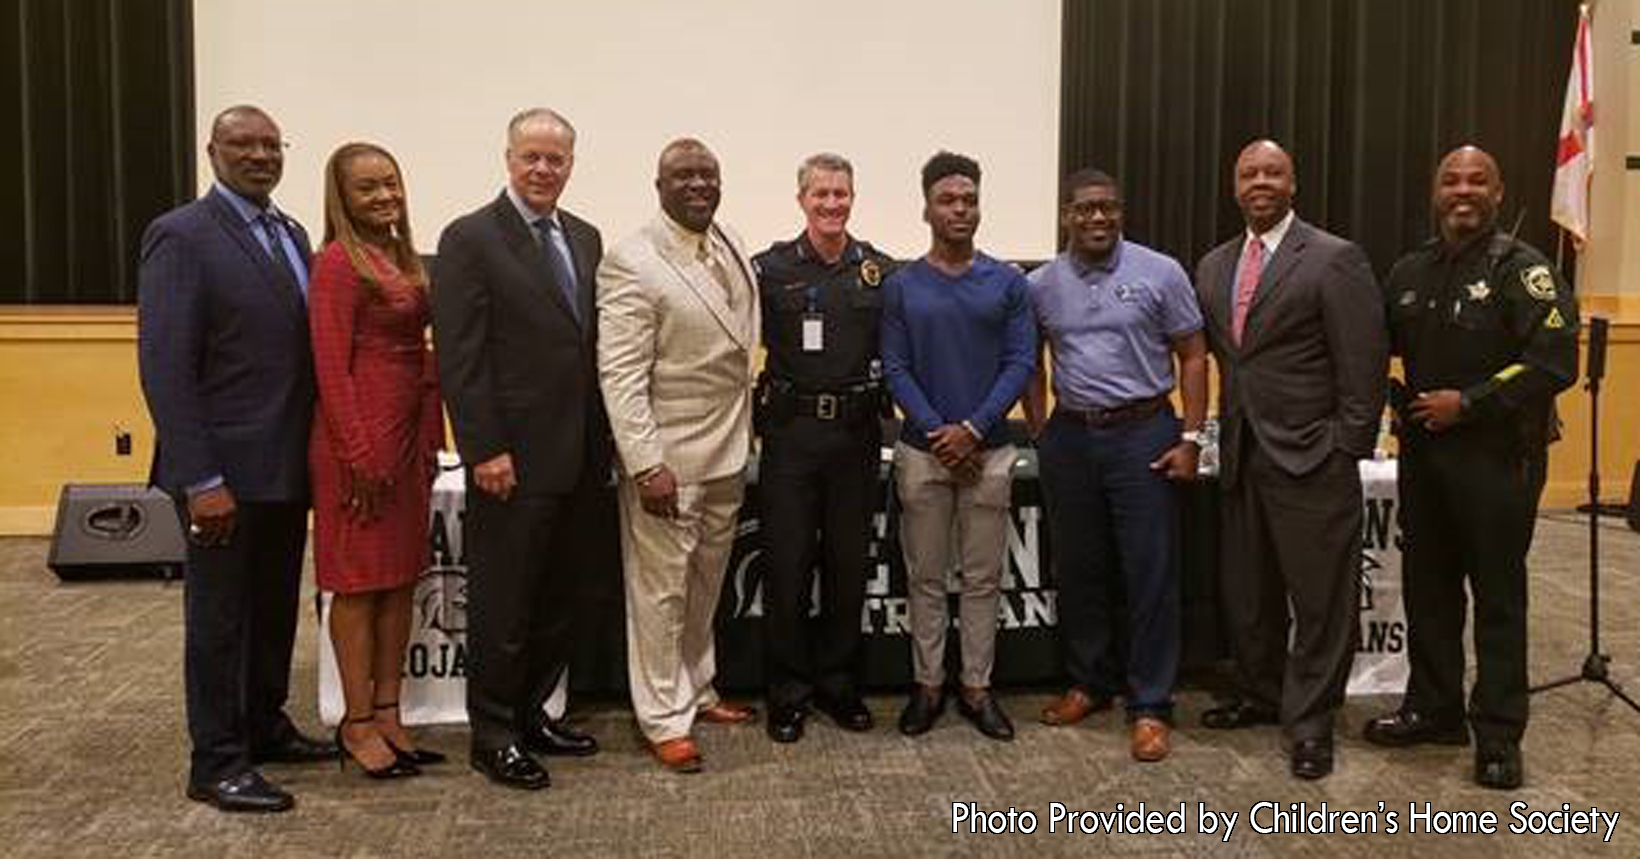 Evans Senior, Brandan Louis, represented Evans High School with the following individuals: Pastor Derrick McRae (Experience Christian Center), Chief Brian Holmes (Orange County Public School’s Safety Specialist), Tammie Holt (CEO of Strengthening Our Sons, Inc.), and Master Deputy Stanley Murry (Orange County Sheriff’s Office). Attorney Greg Jackson, Esq. was the moderator. Pictures were taken by the Evans Media Department.